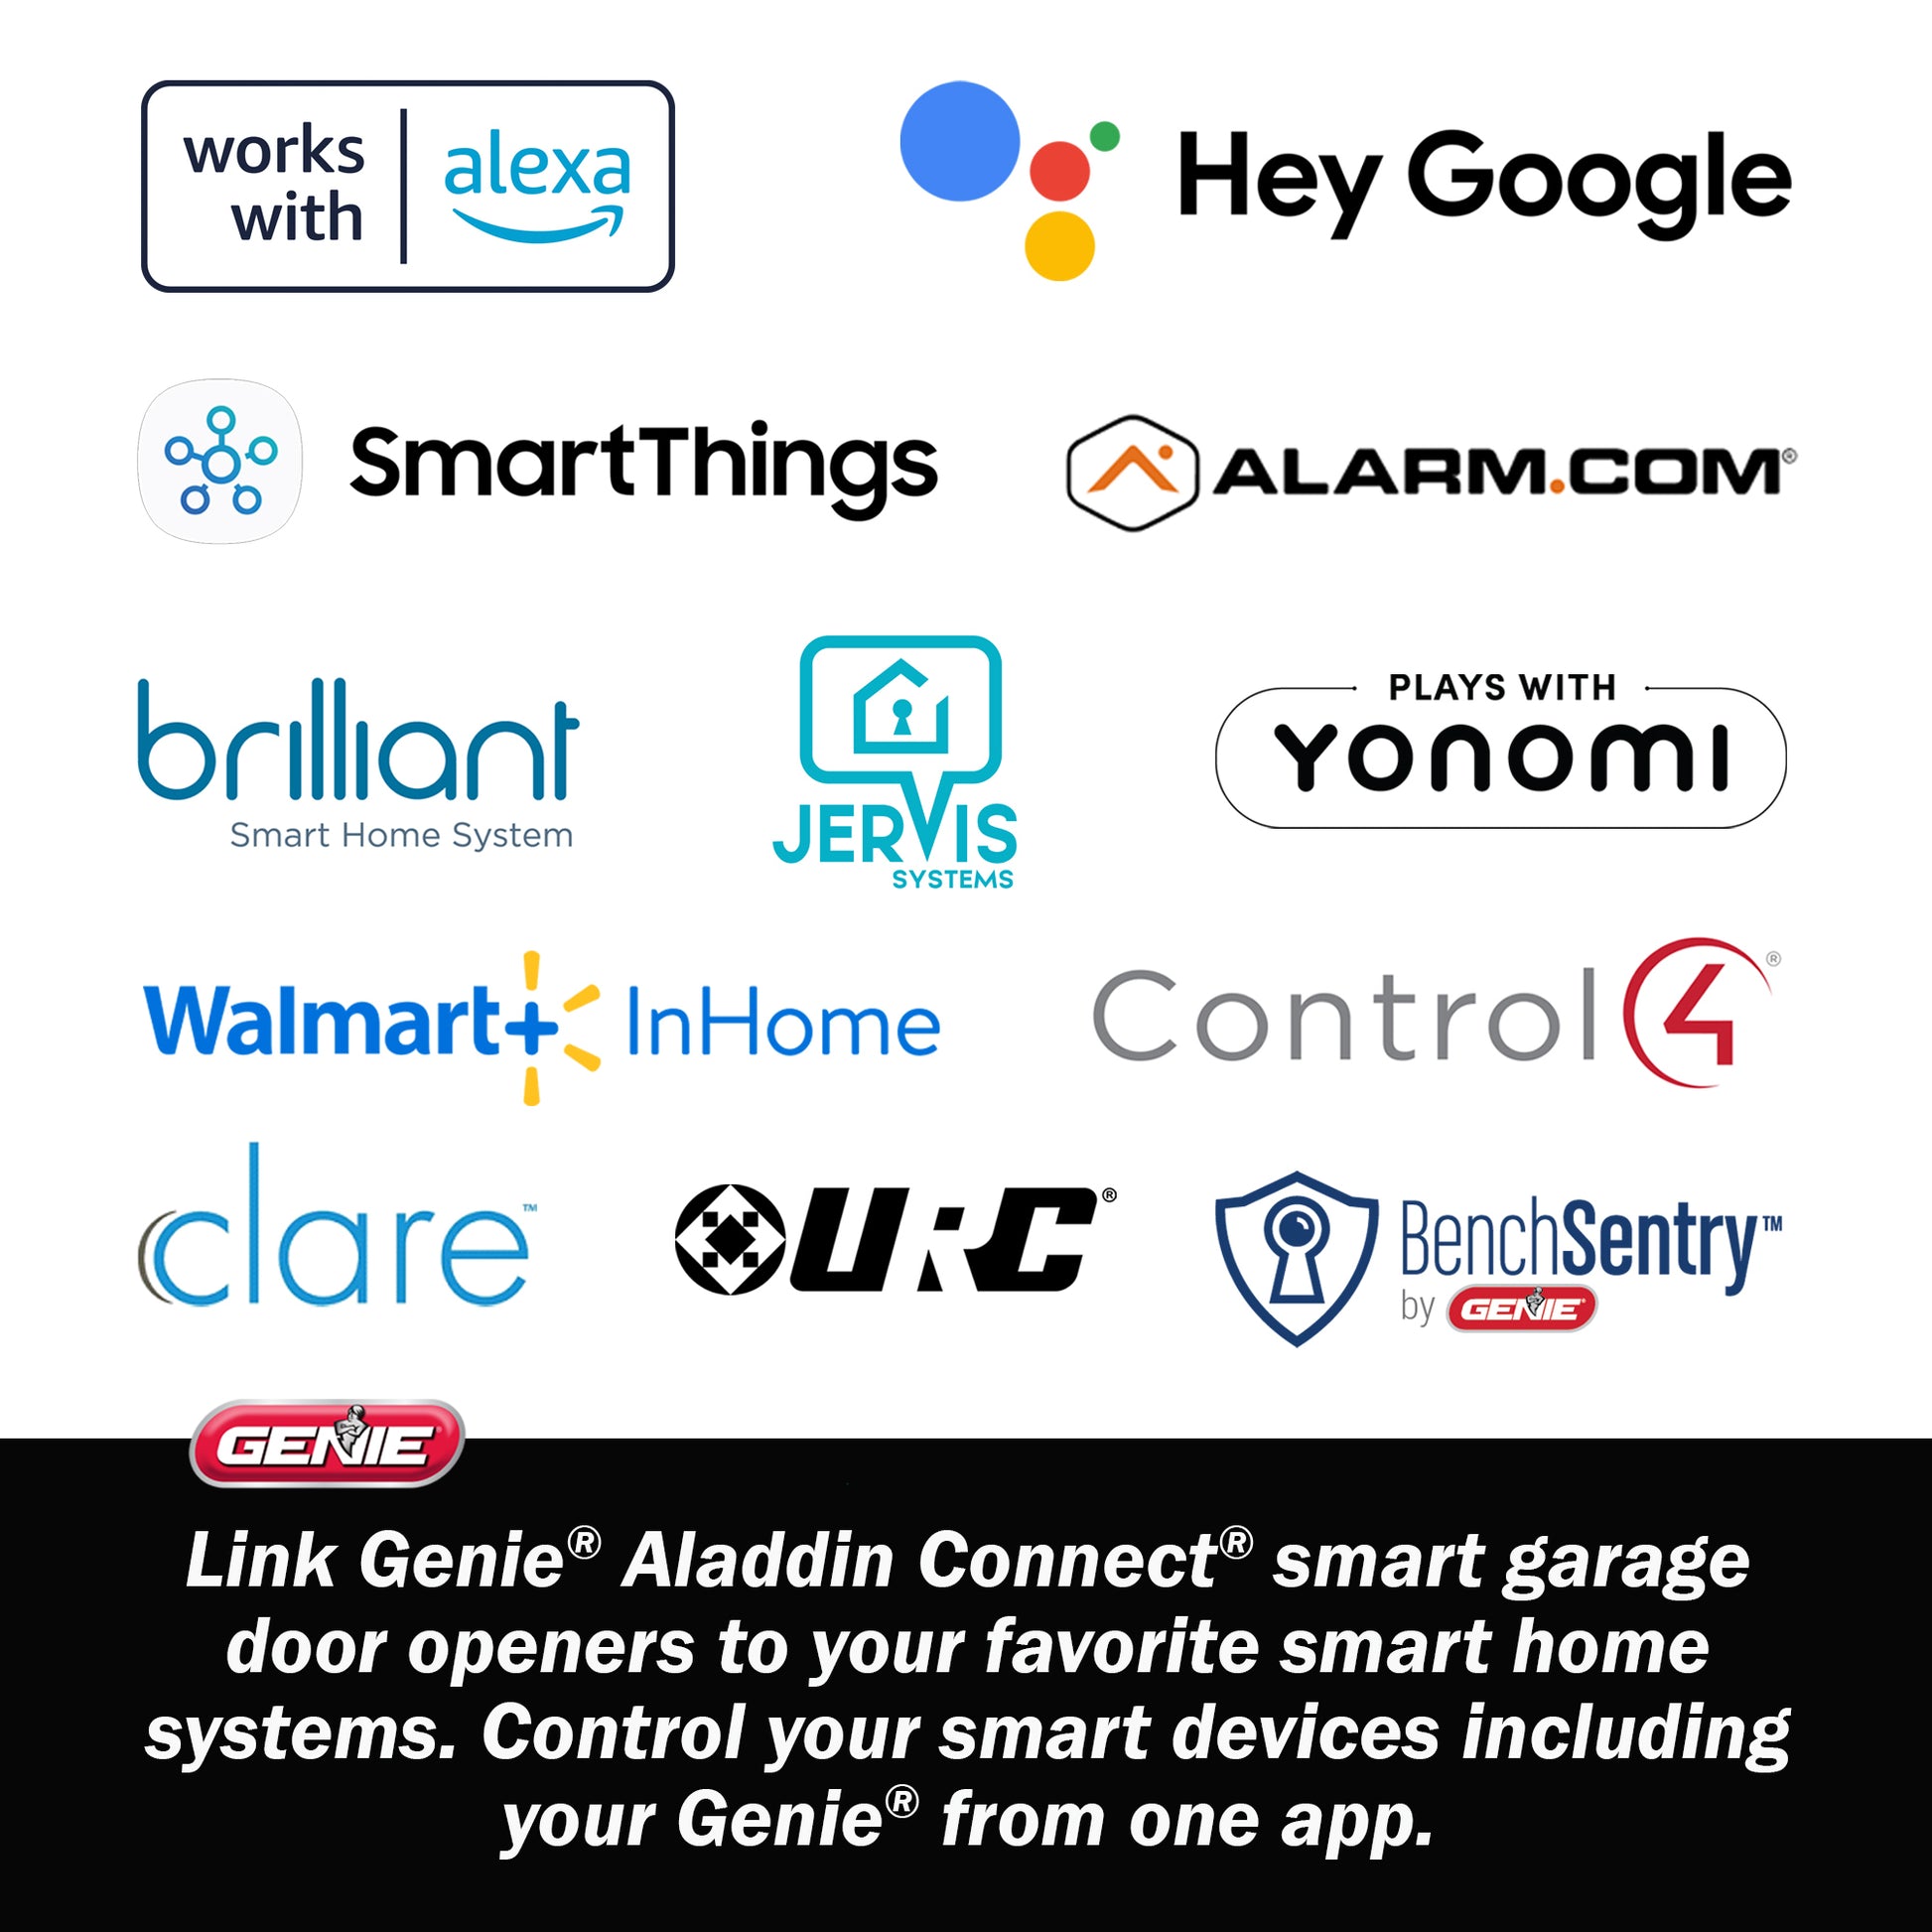 Genie Aladdin Connect smart garage door openers connect to other smart home systems